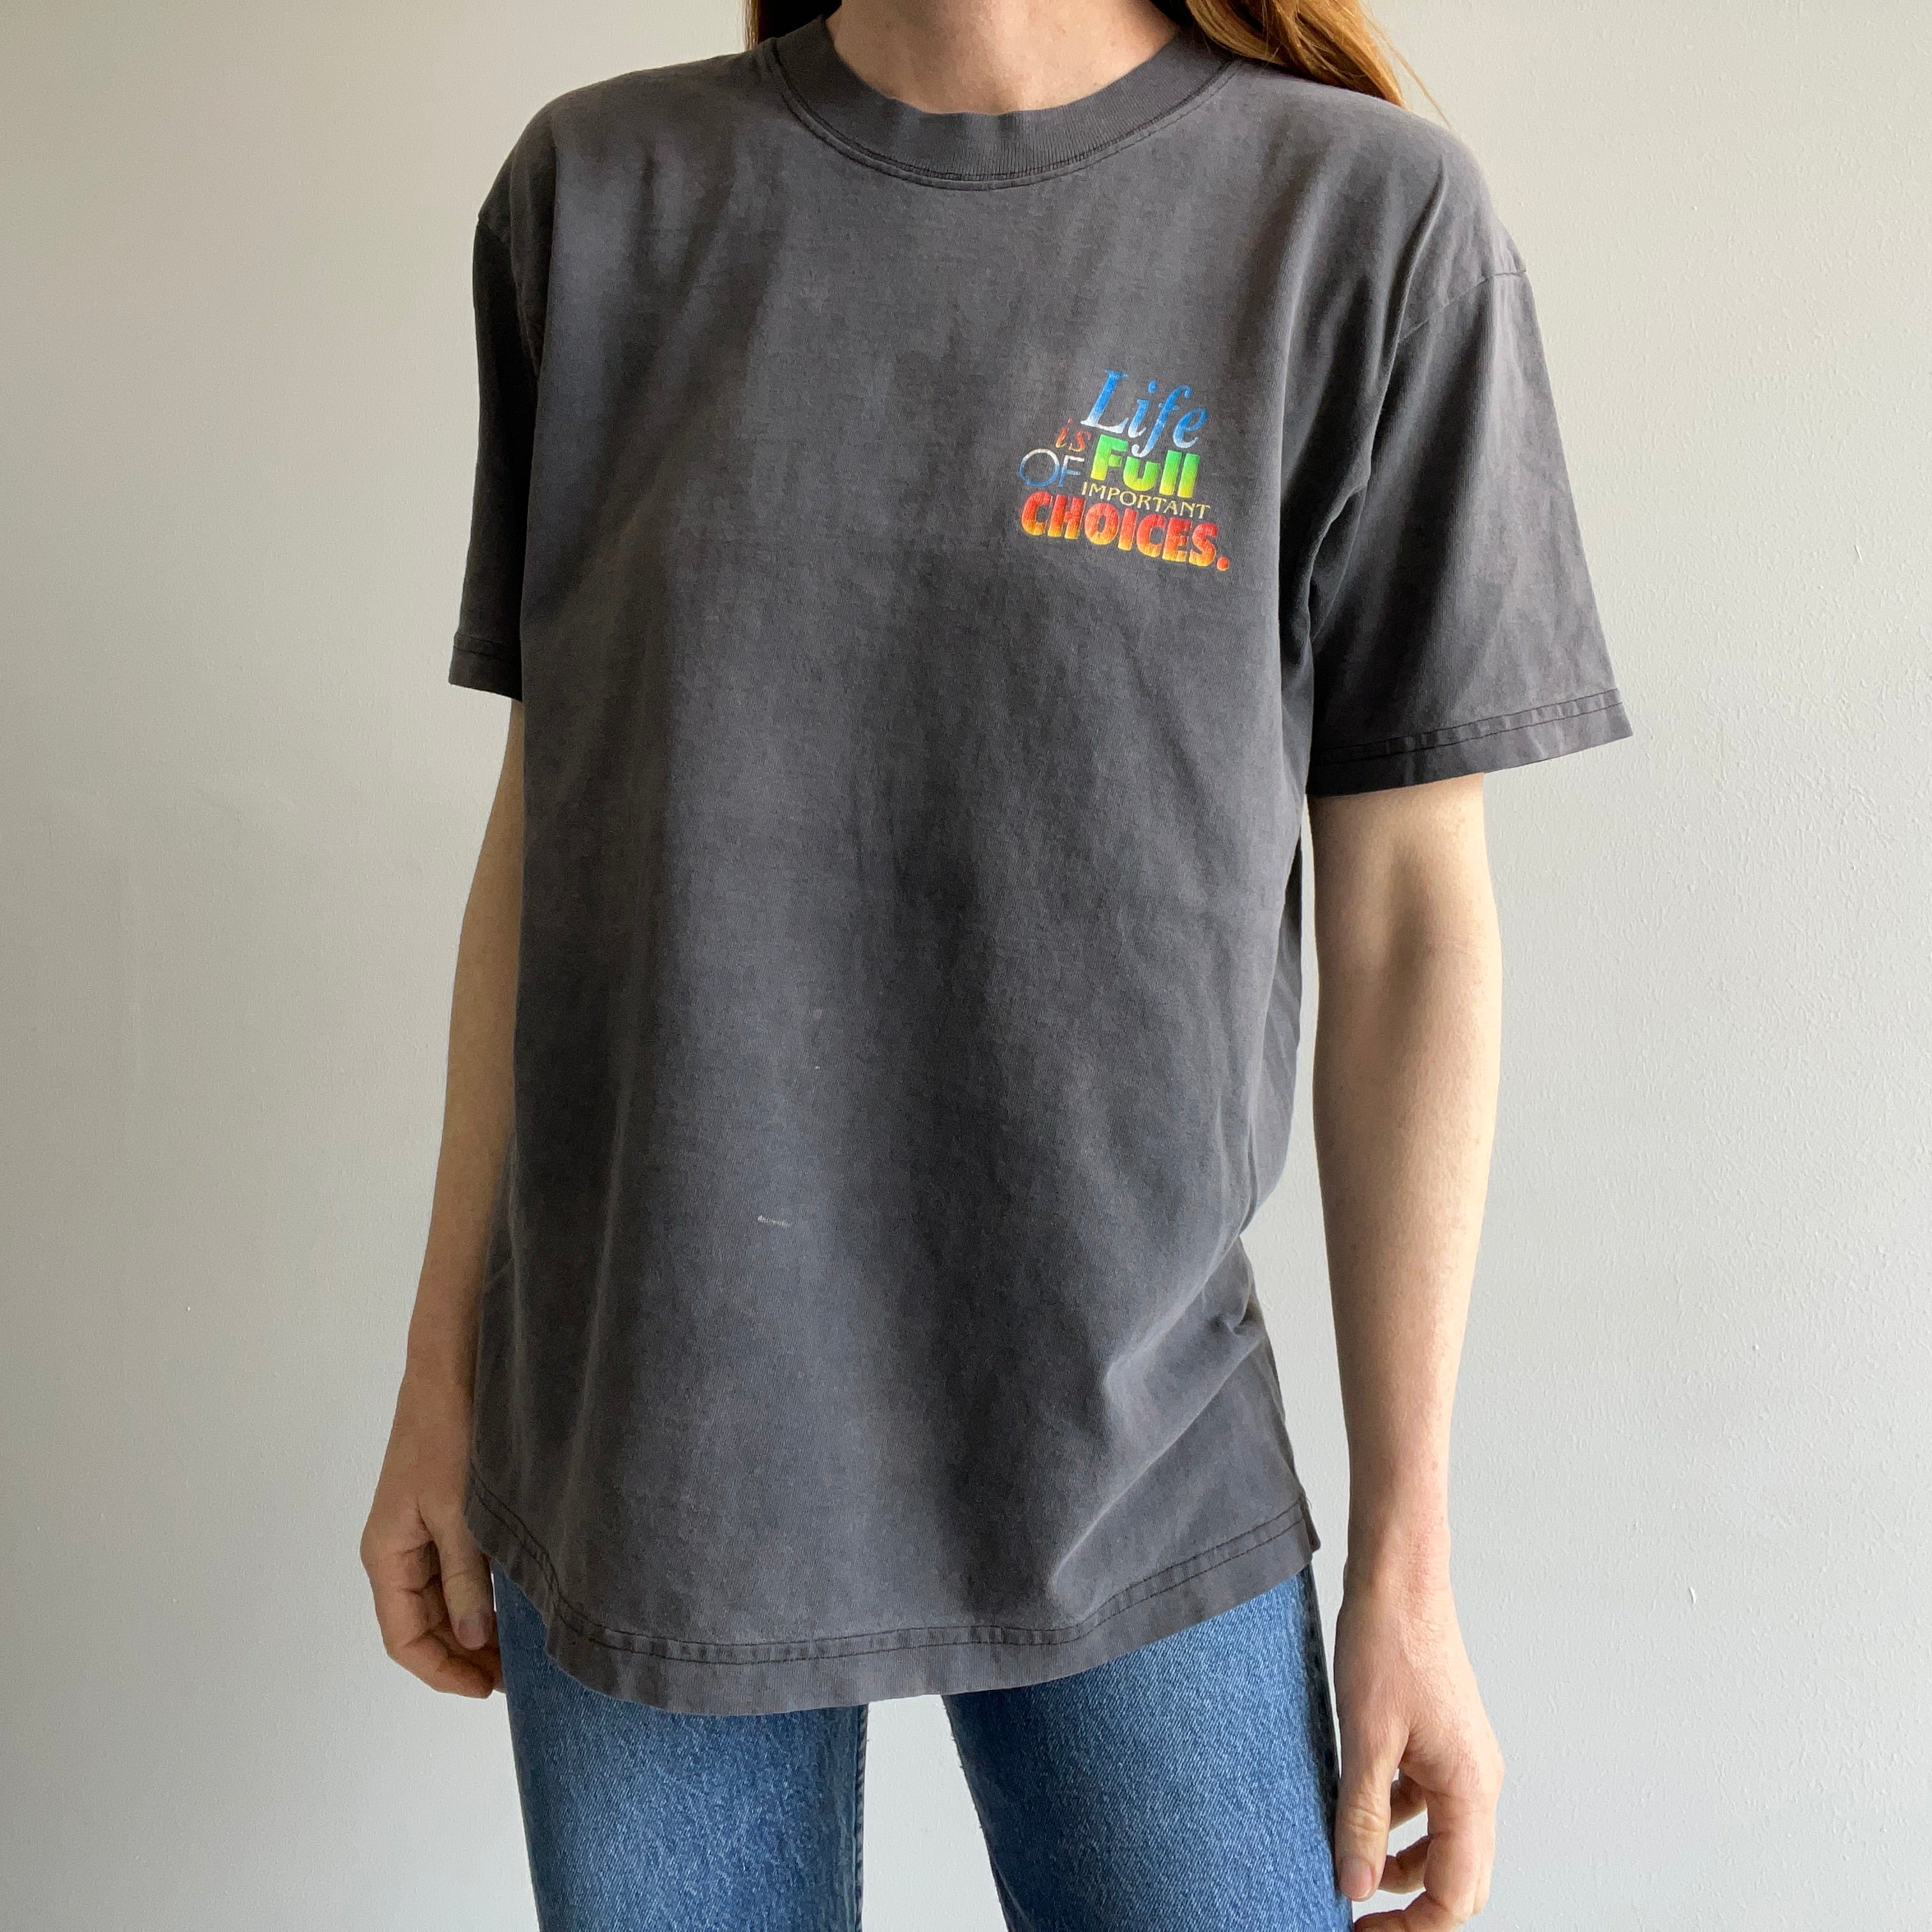 1997 Life Is Full Of Important Choices Faded and Stained T-Shirt